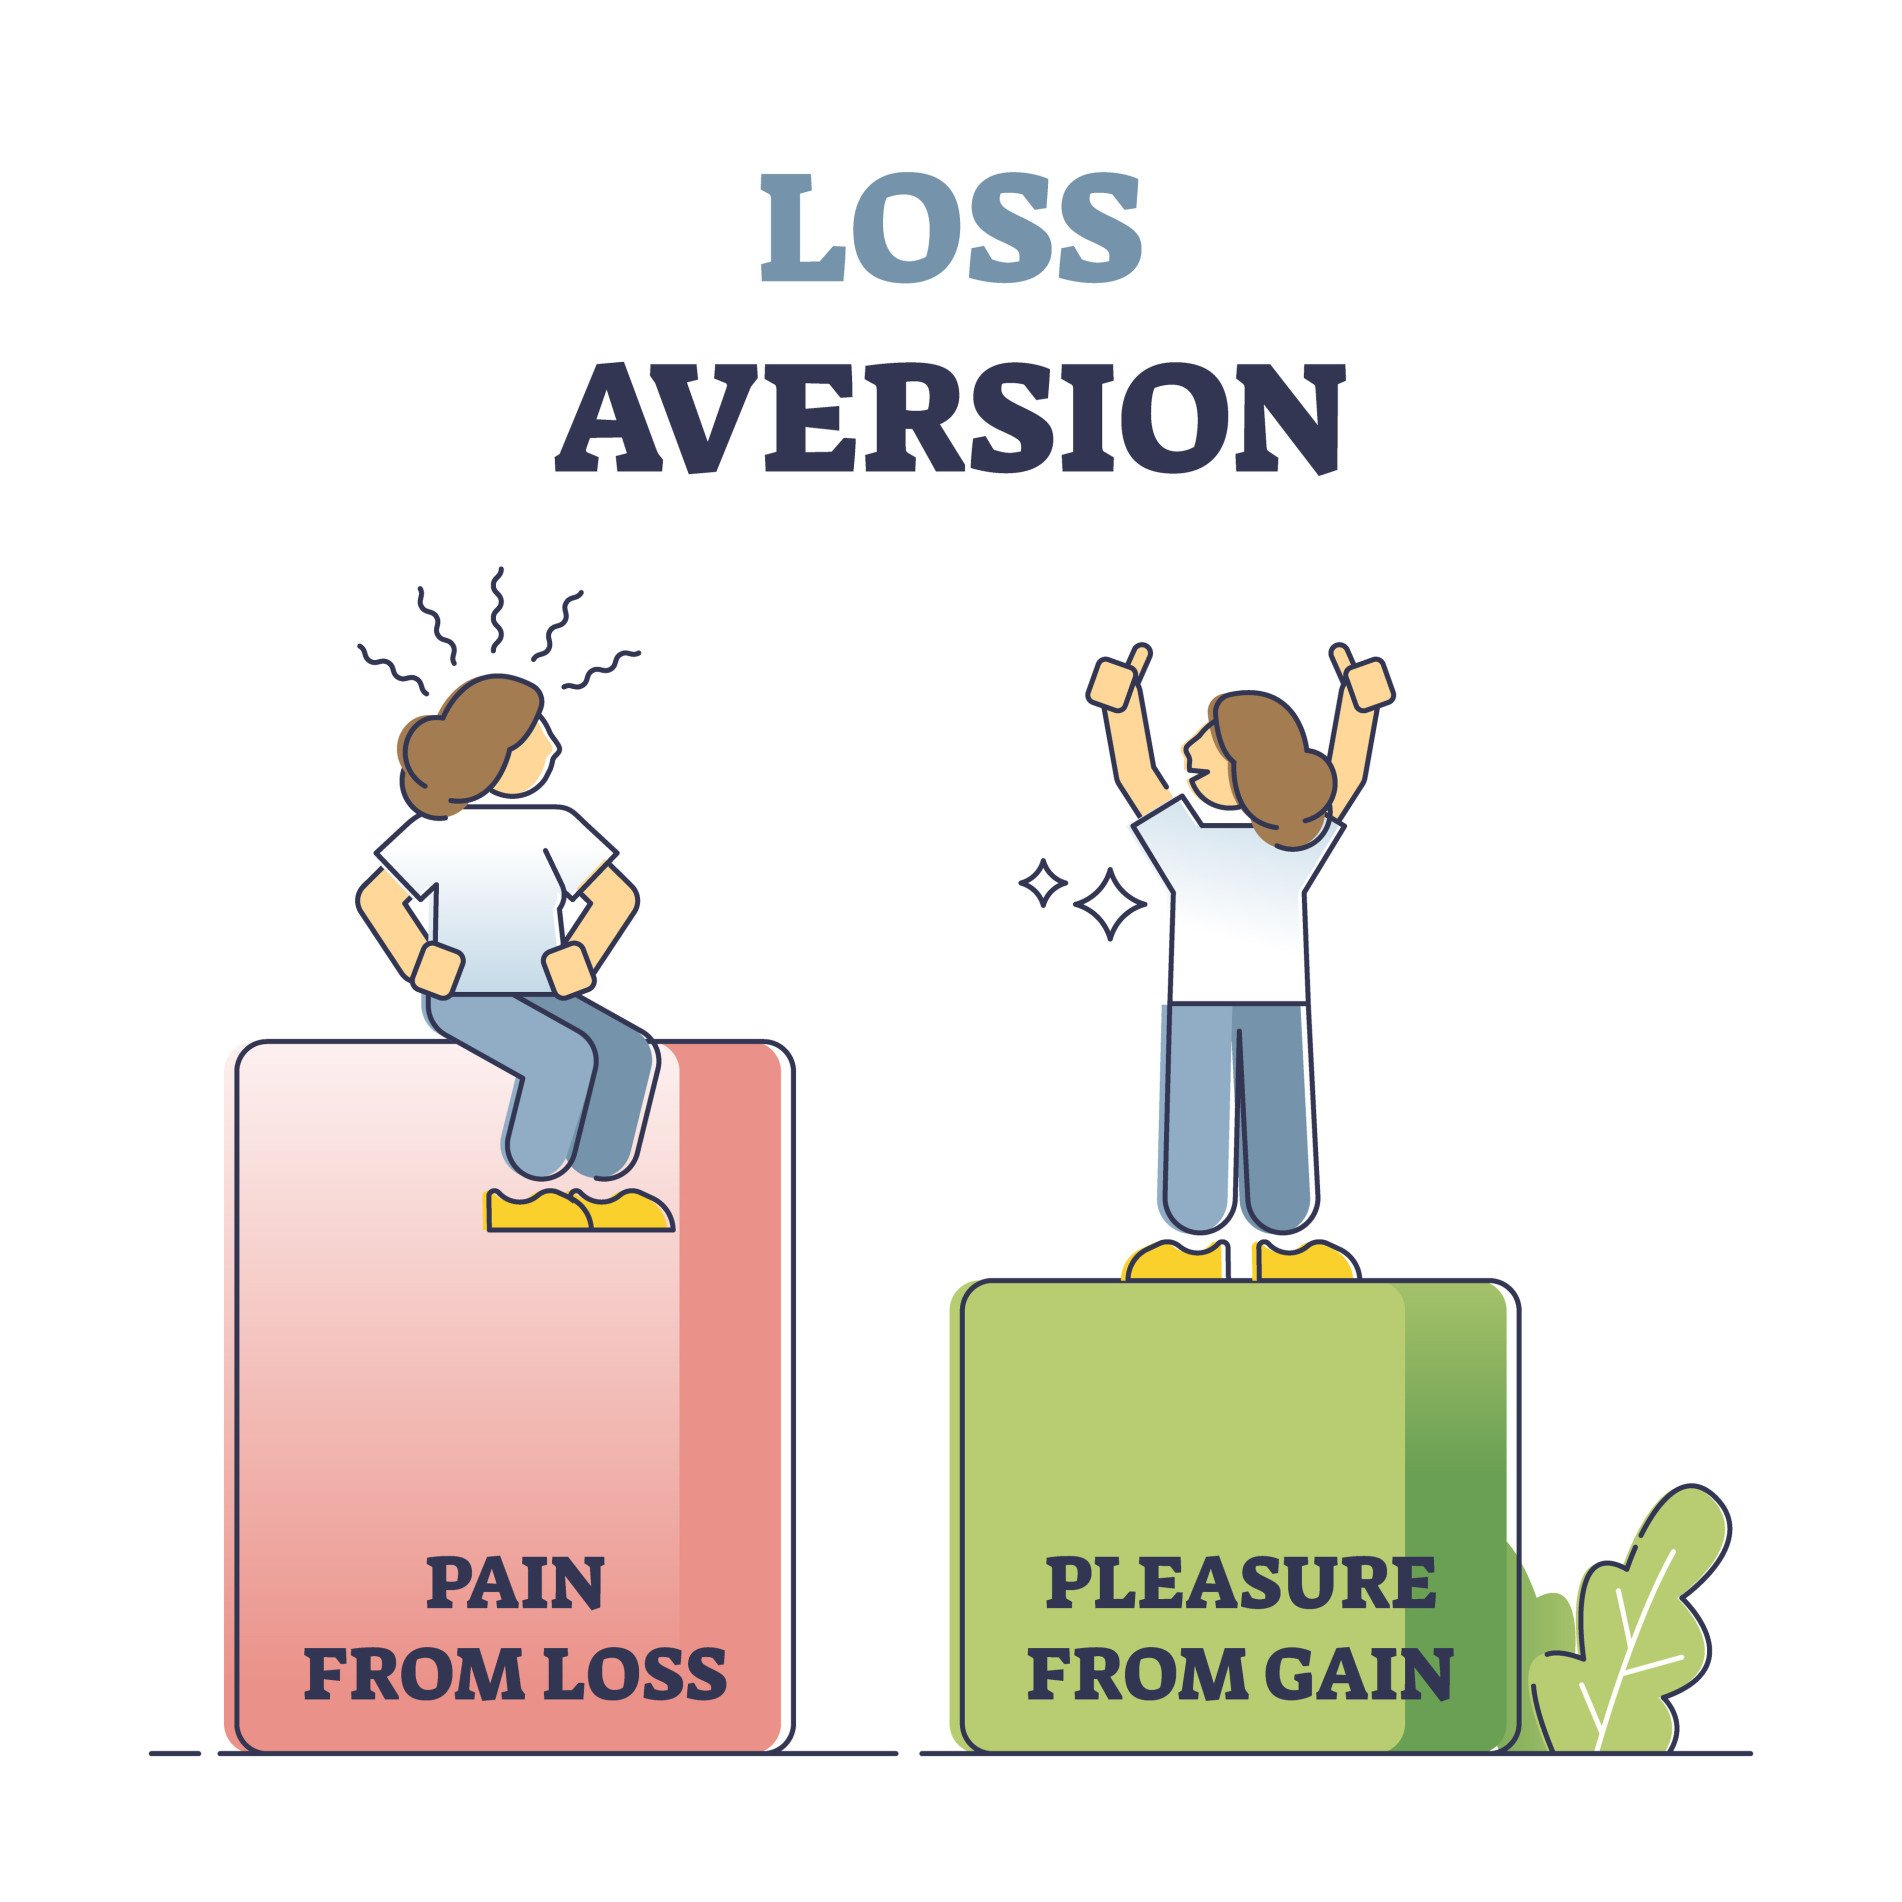 Loss aversion attitude as behavioral bias feeling comparison outline concept. Pain and pleasure gain uneven levels visualization as irrational psychological emotion in economy vector.